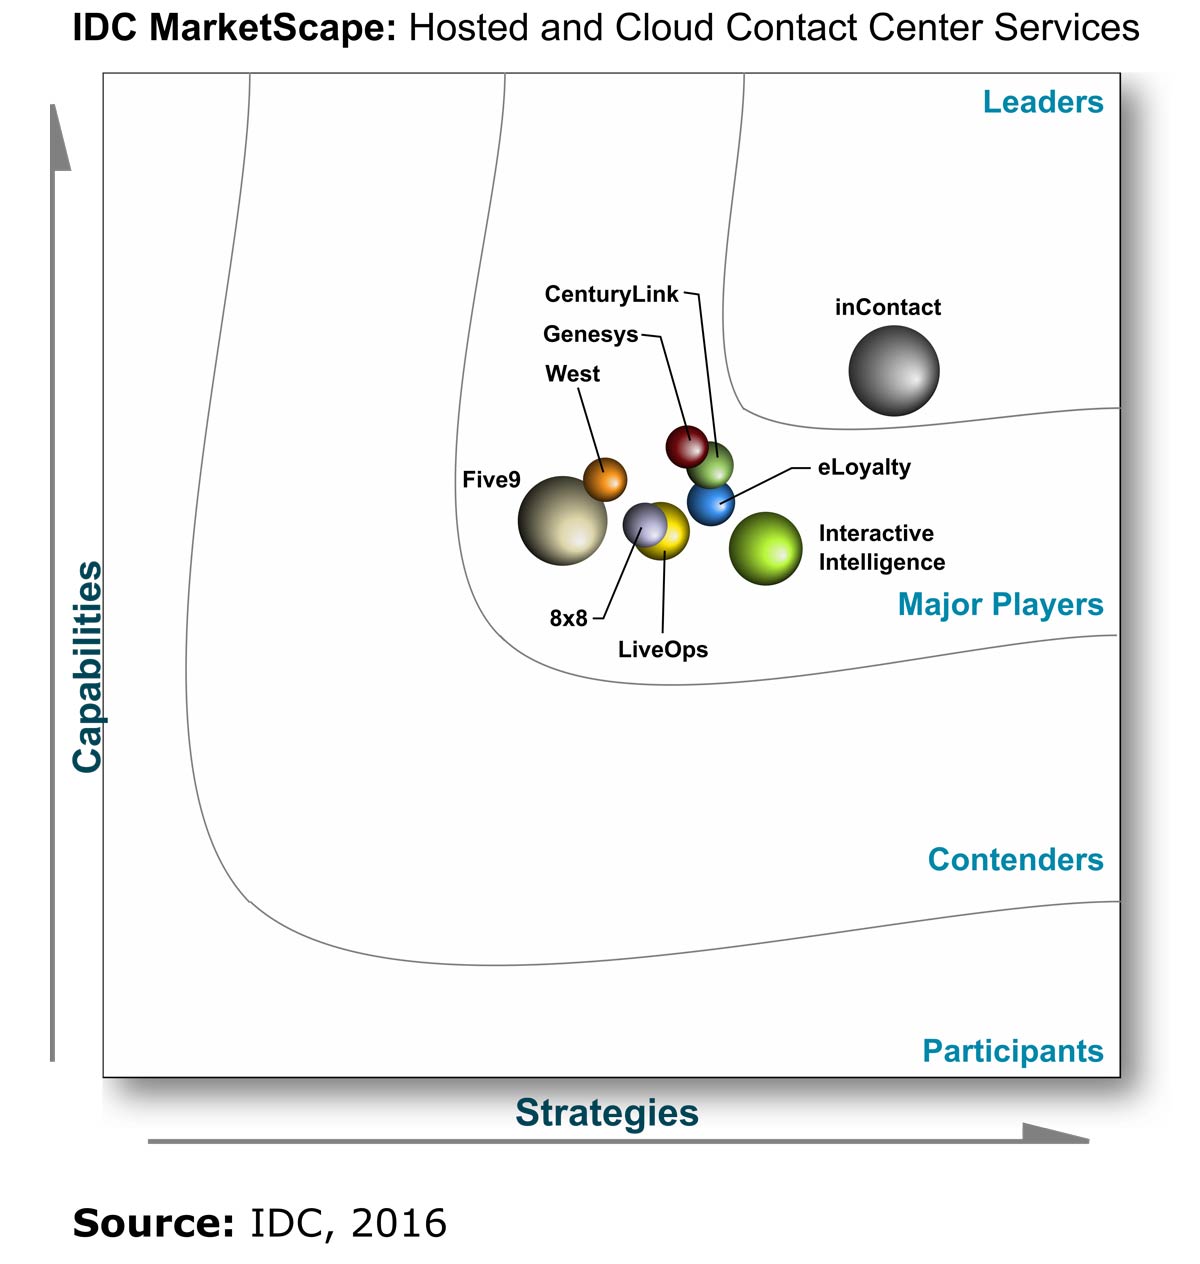 idc marketscape for cloud contact centers